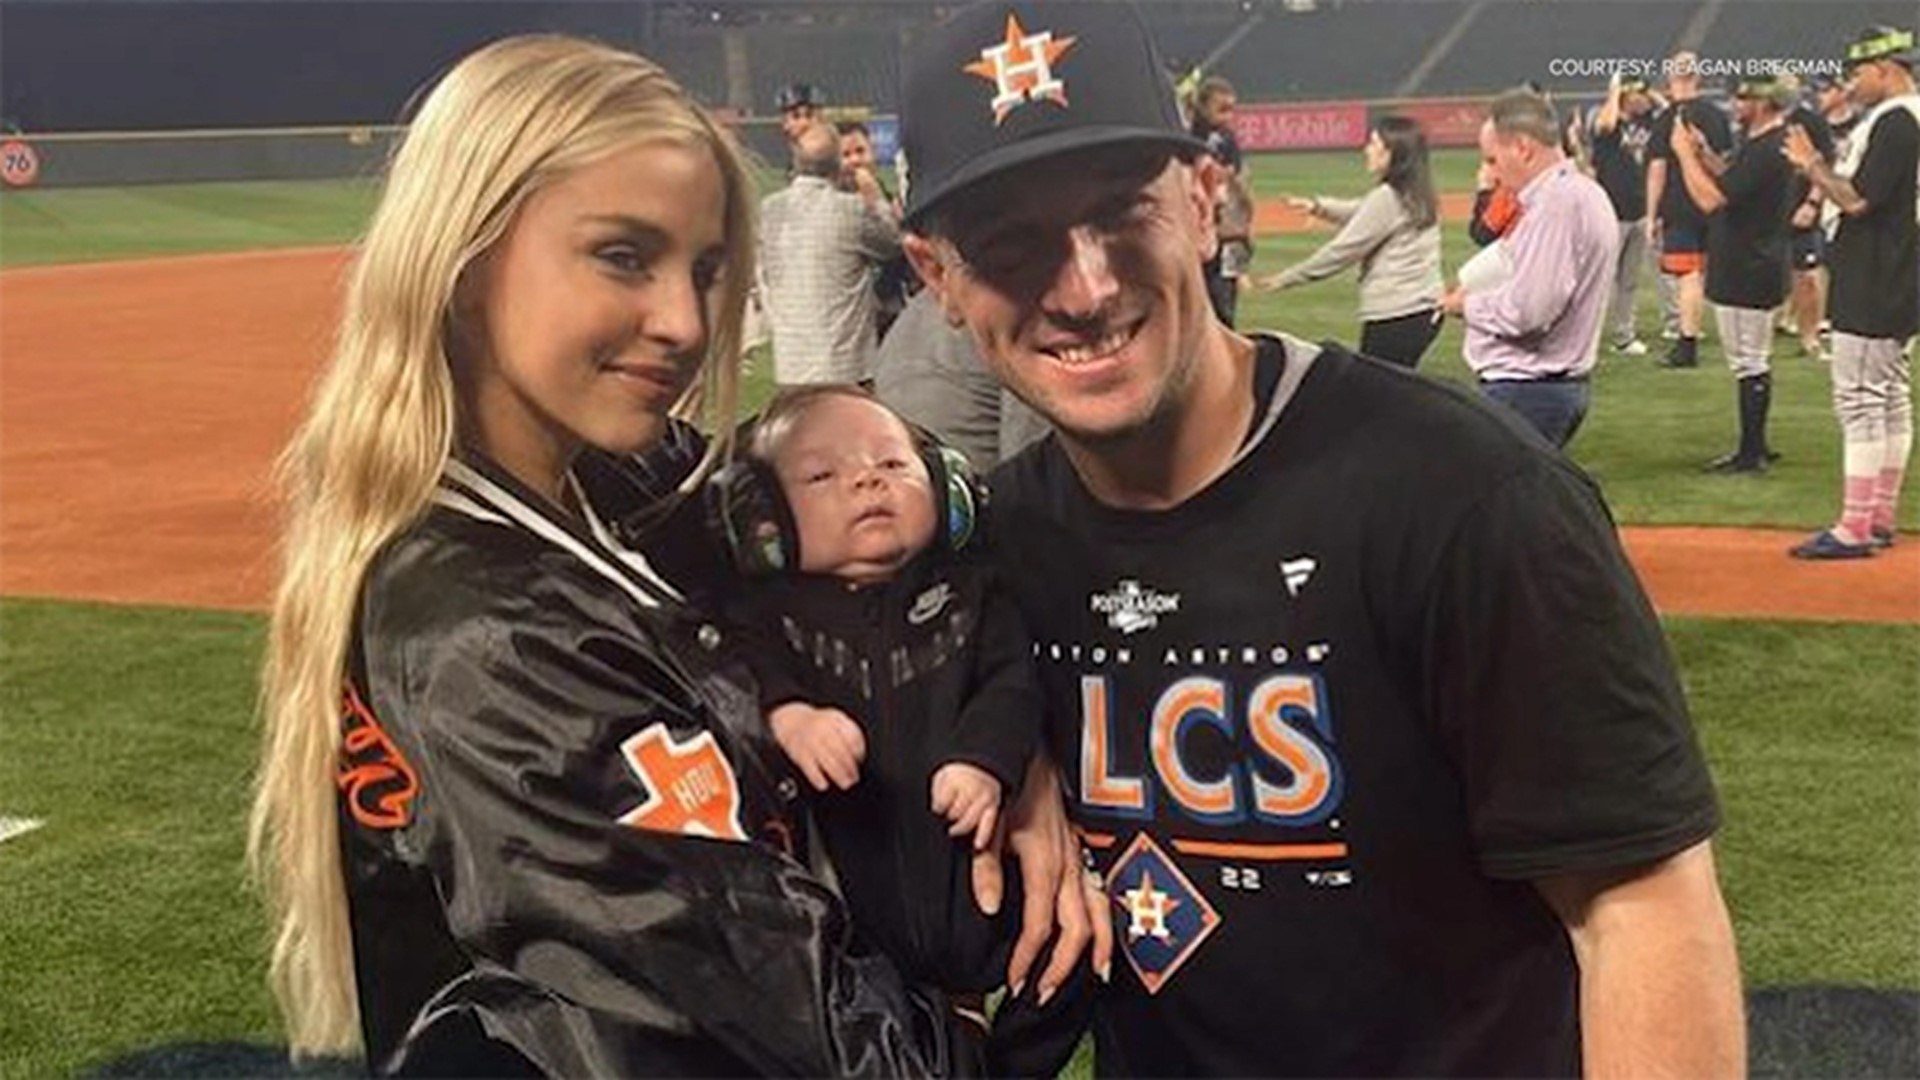 Ballplayers are known for being superstitious and Reagan Bregman, the wife of Astros 3B Alex Bregman, said baseball wives have them too.